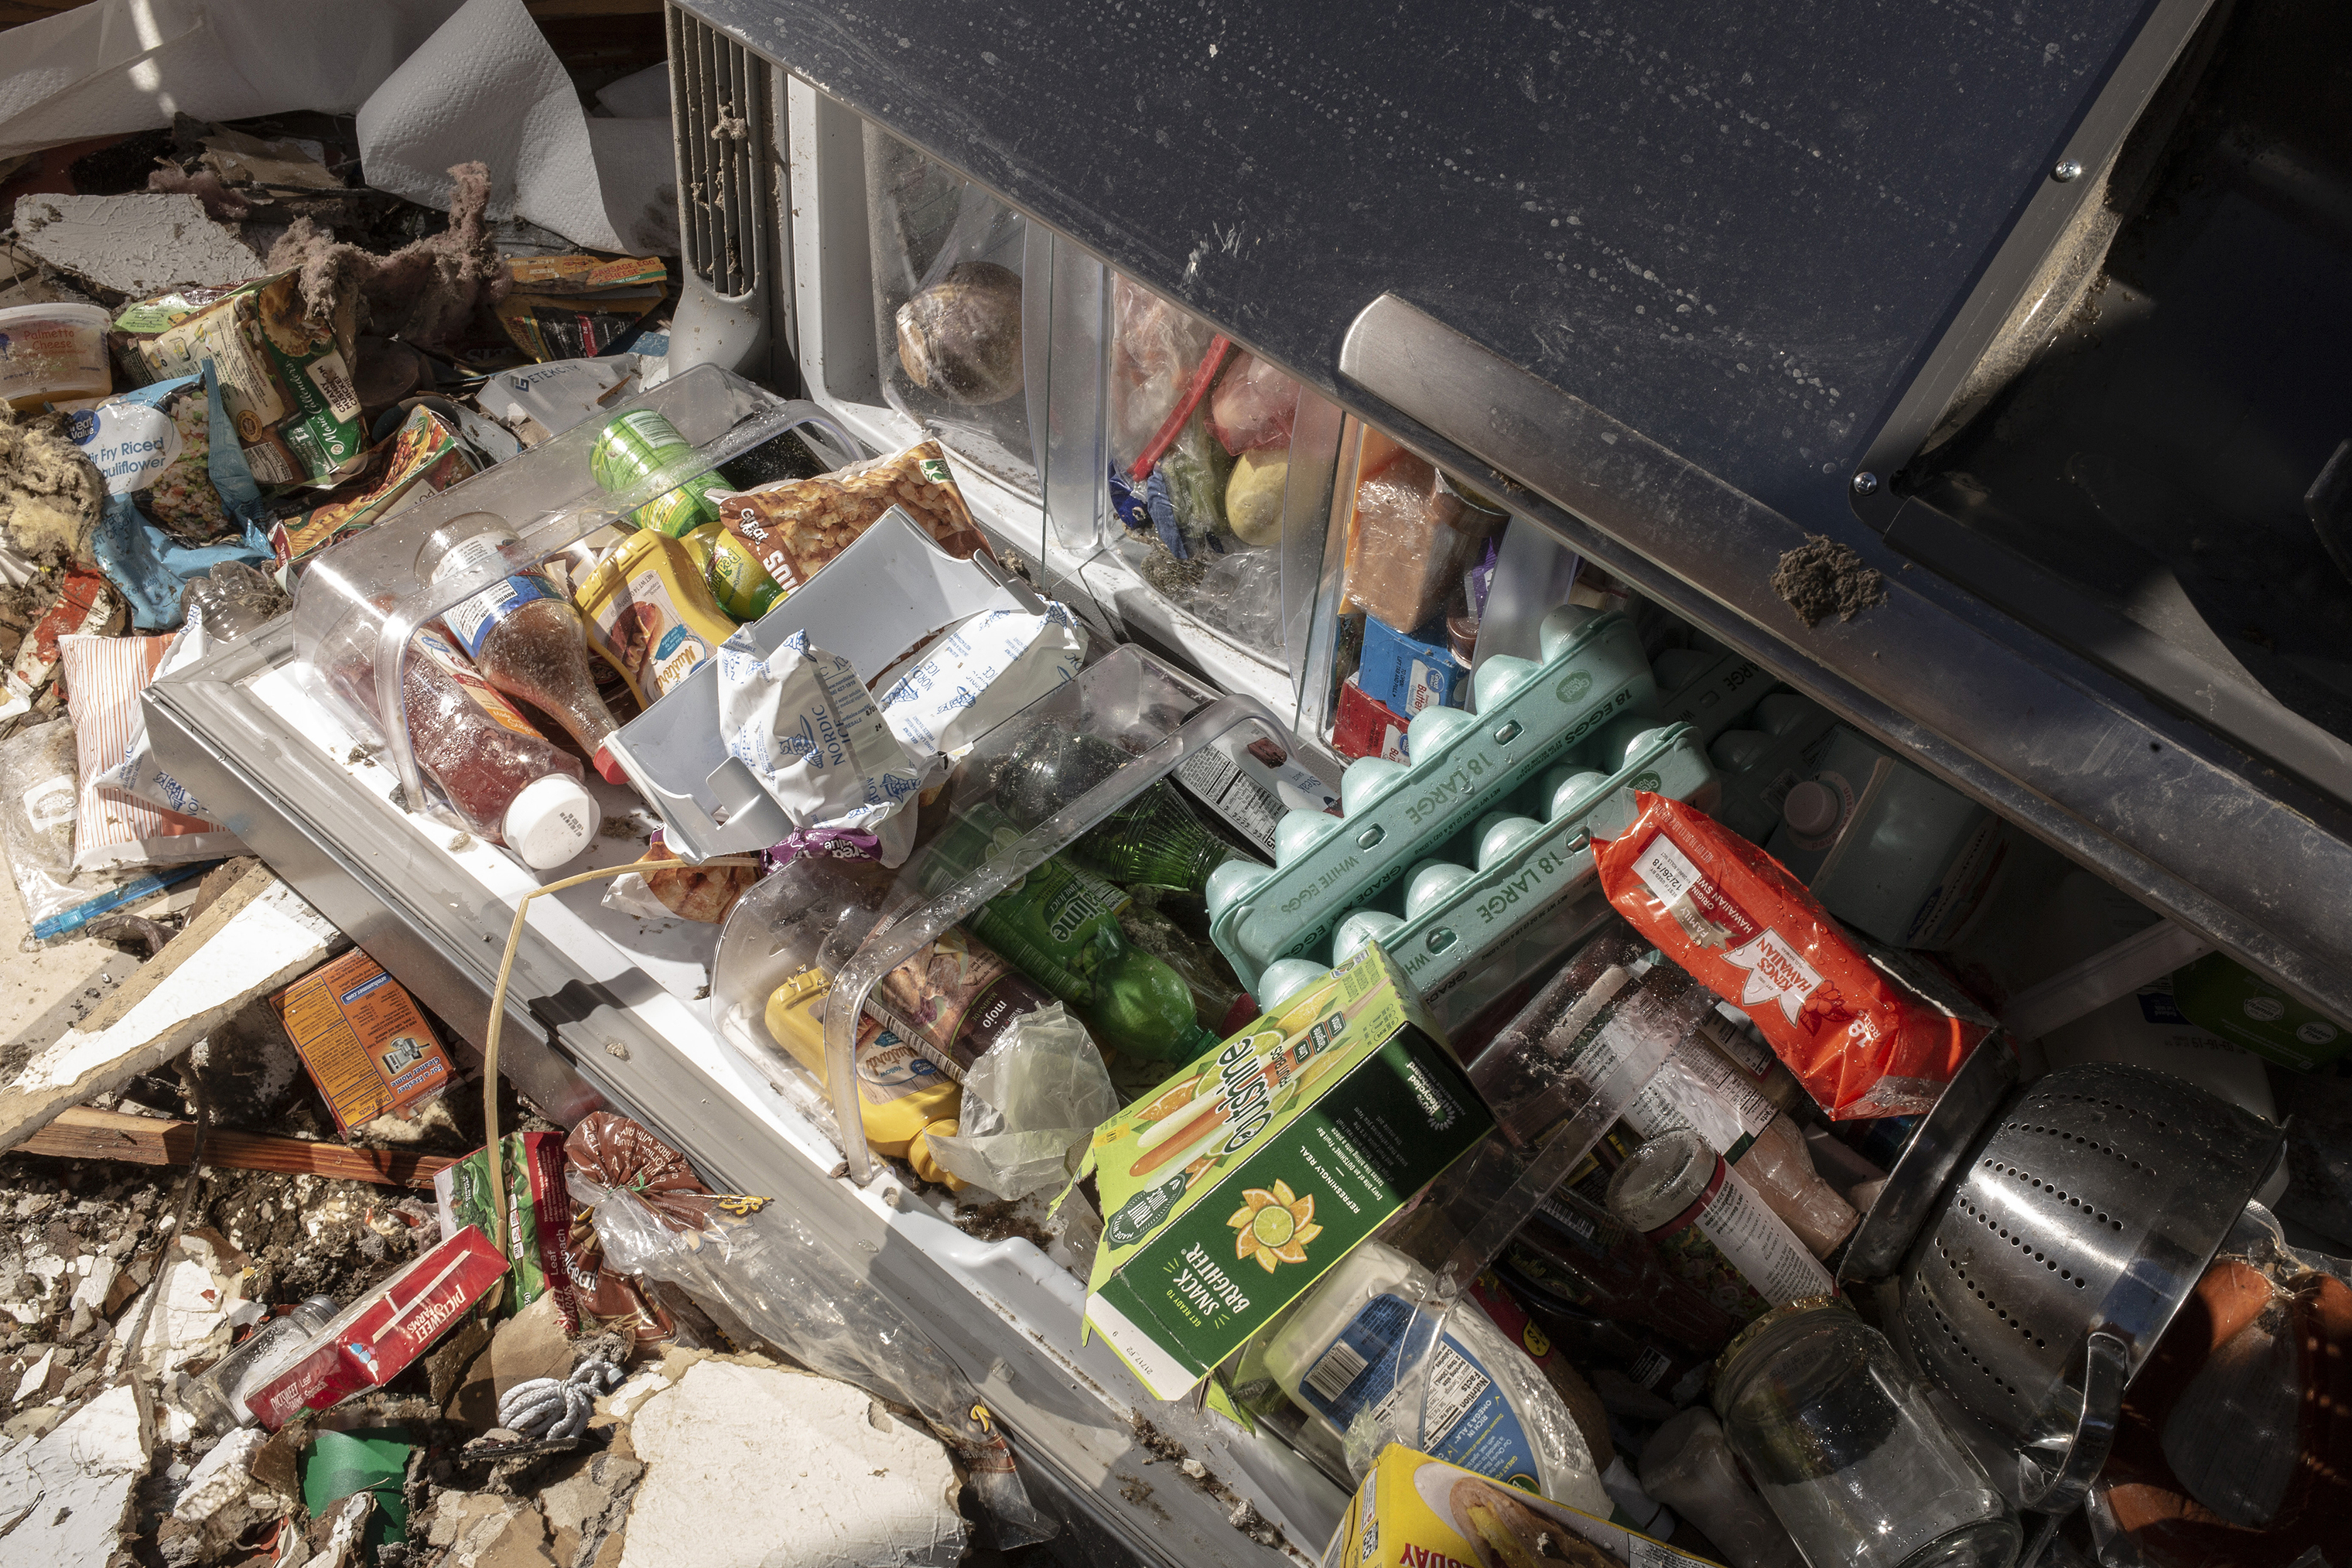 The contents of the Mattocks' refrigerator strewn on their kitchen floor after a tornado passed over killing several people and destroying homes in Beauregard, Alabama on March 4, 2019. (Bryan Anselm—Redux for TIME)